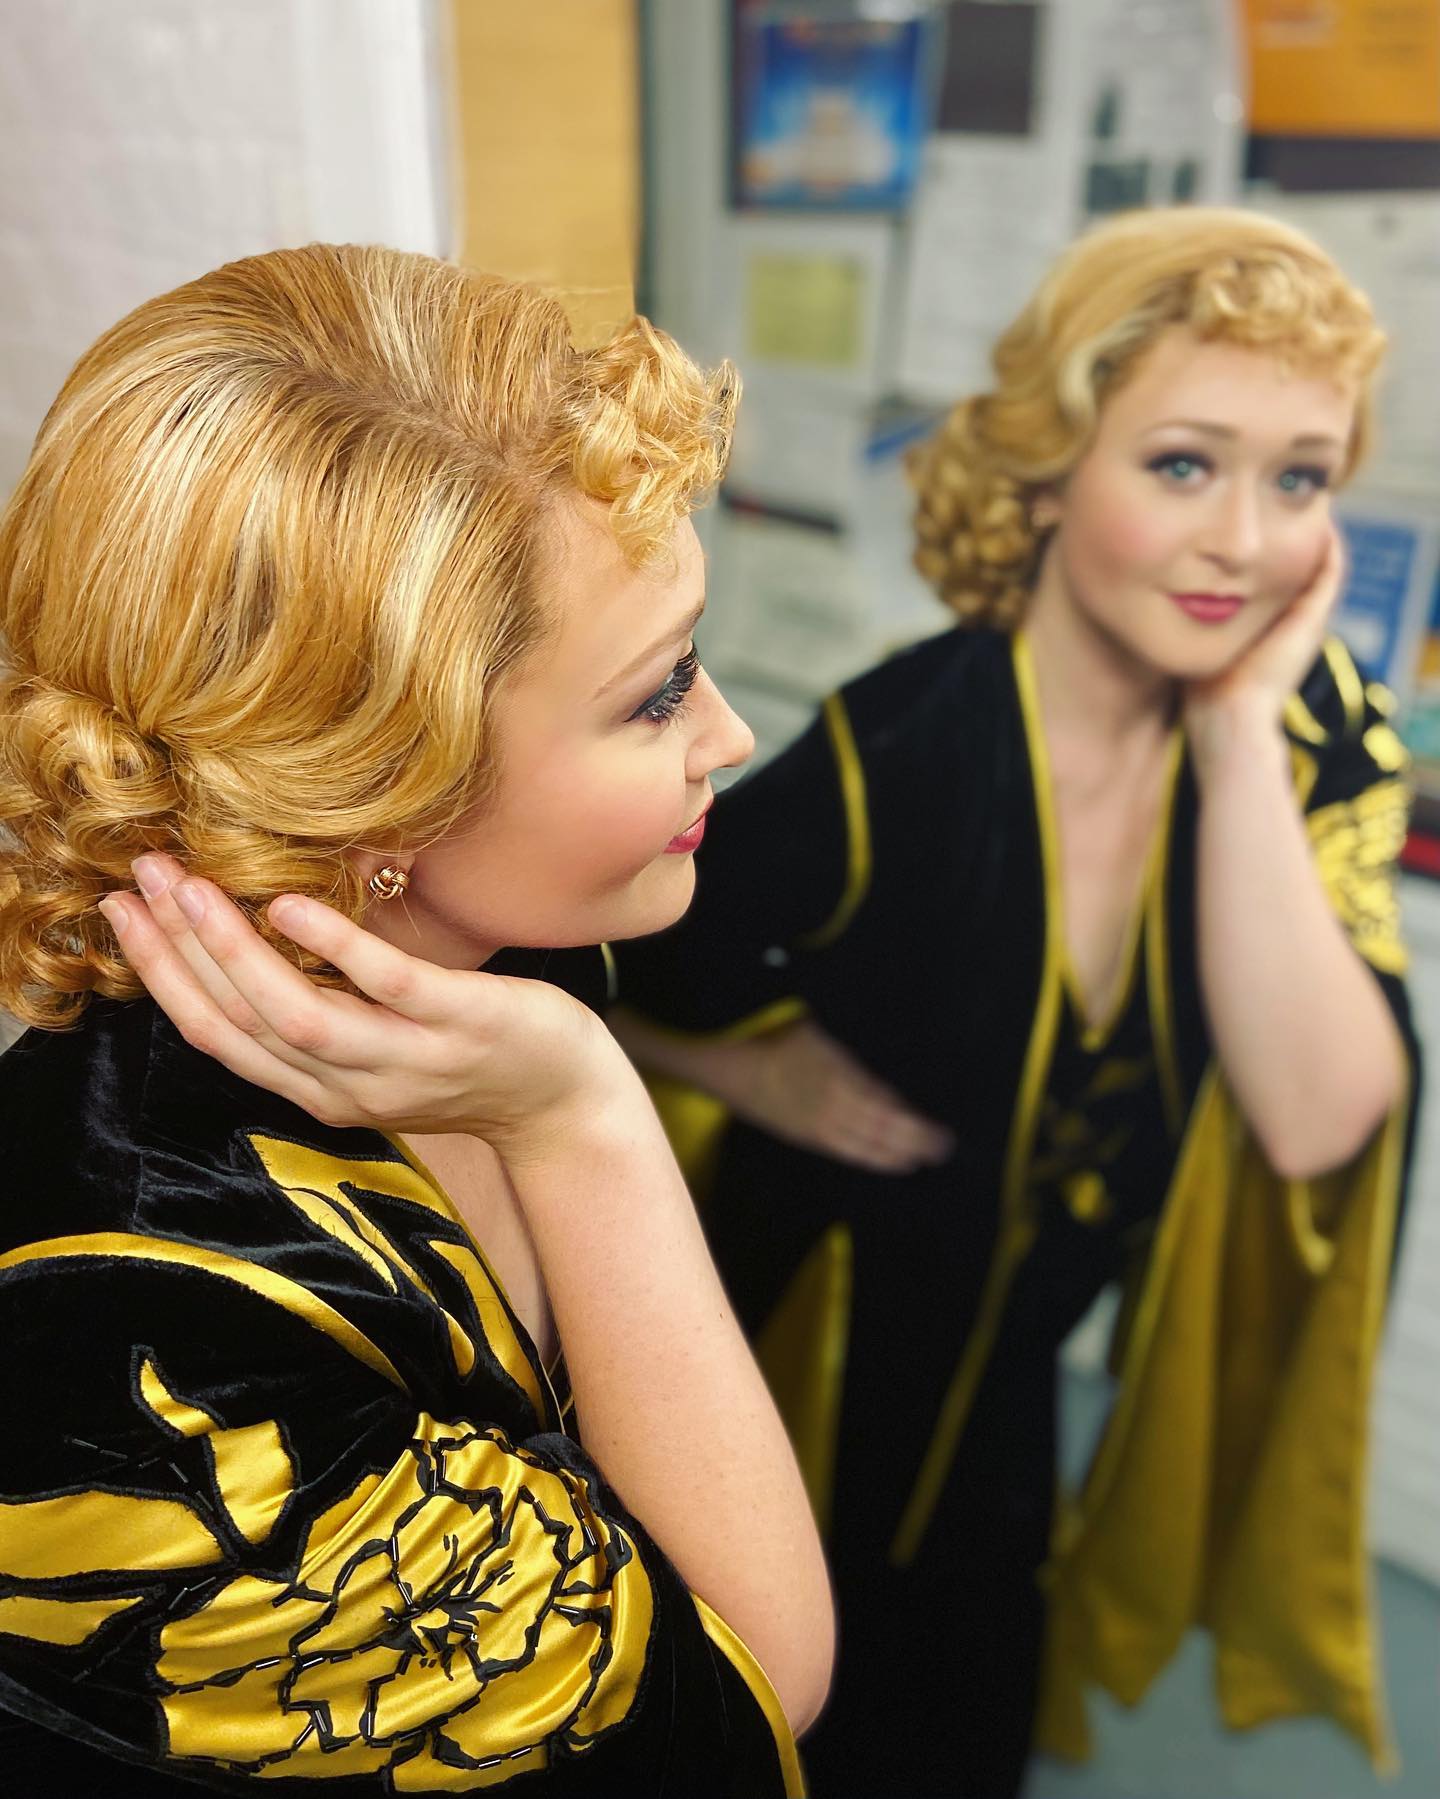 Devon Hadsell from Some Like it Hot on Broadway